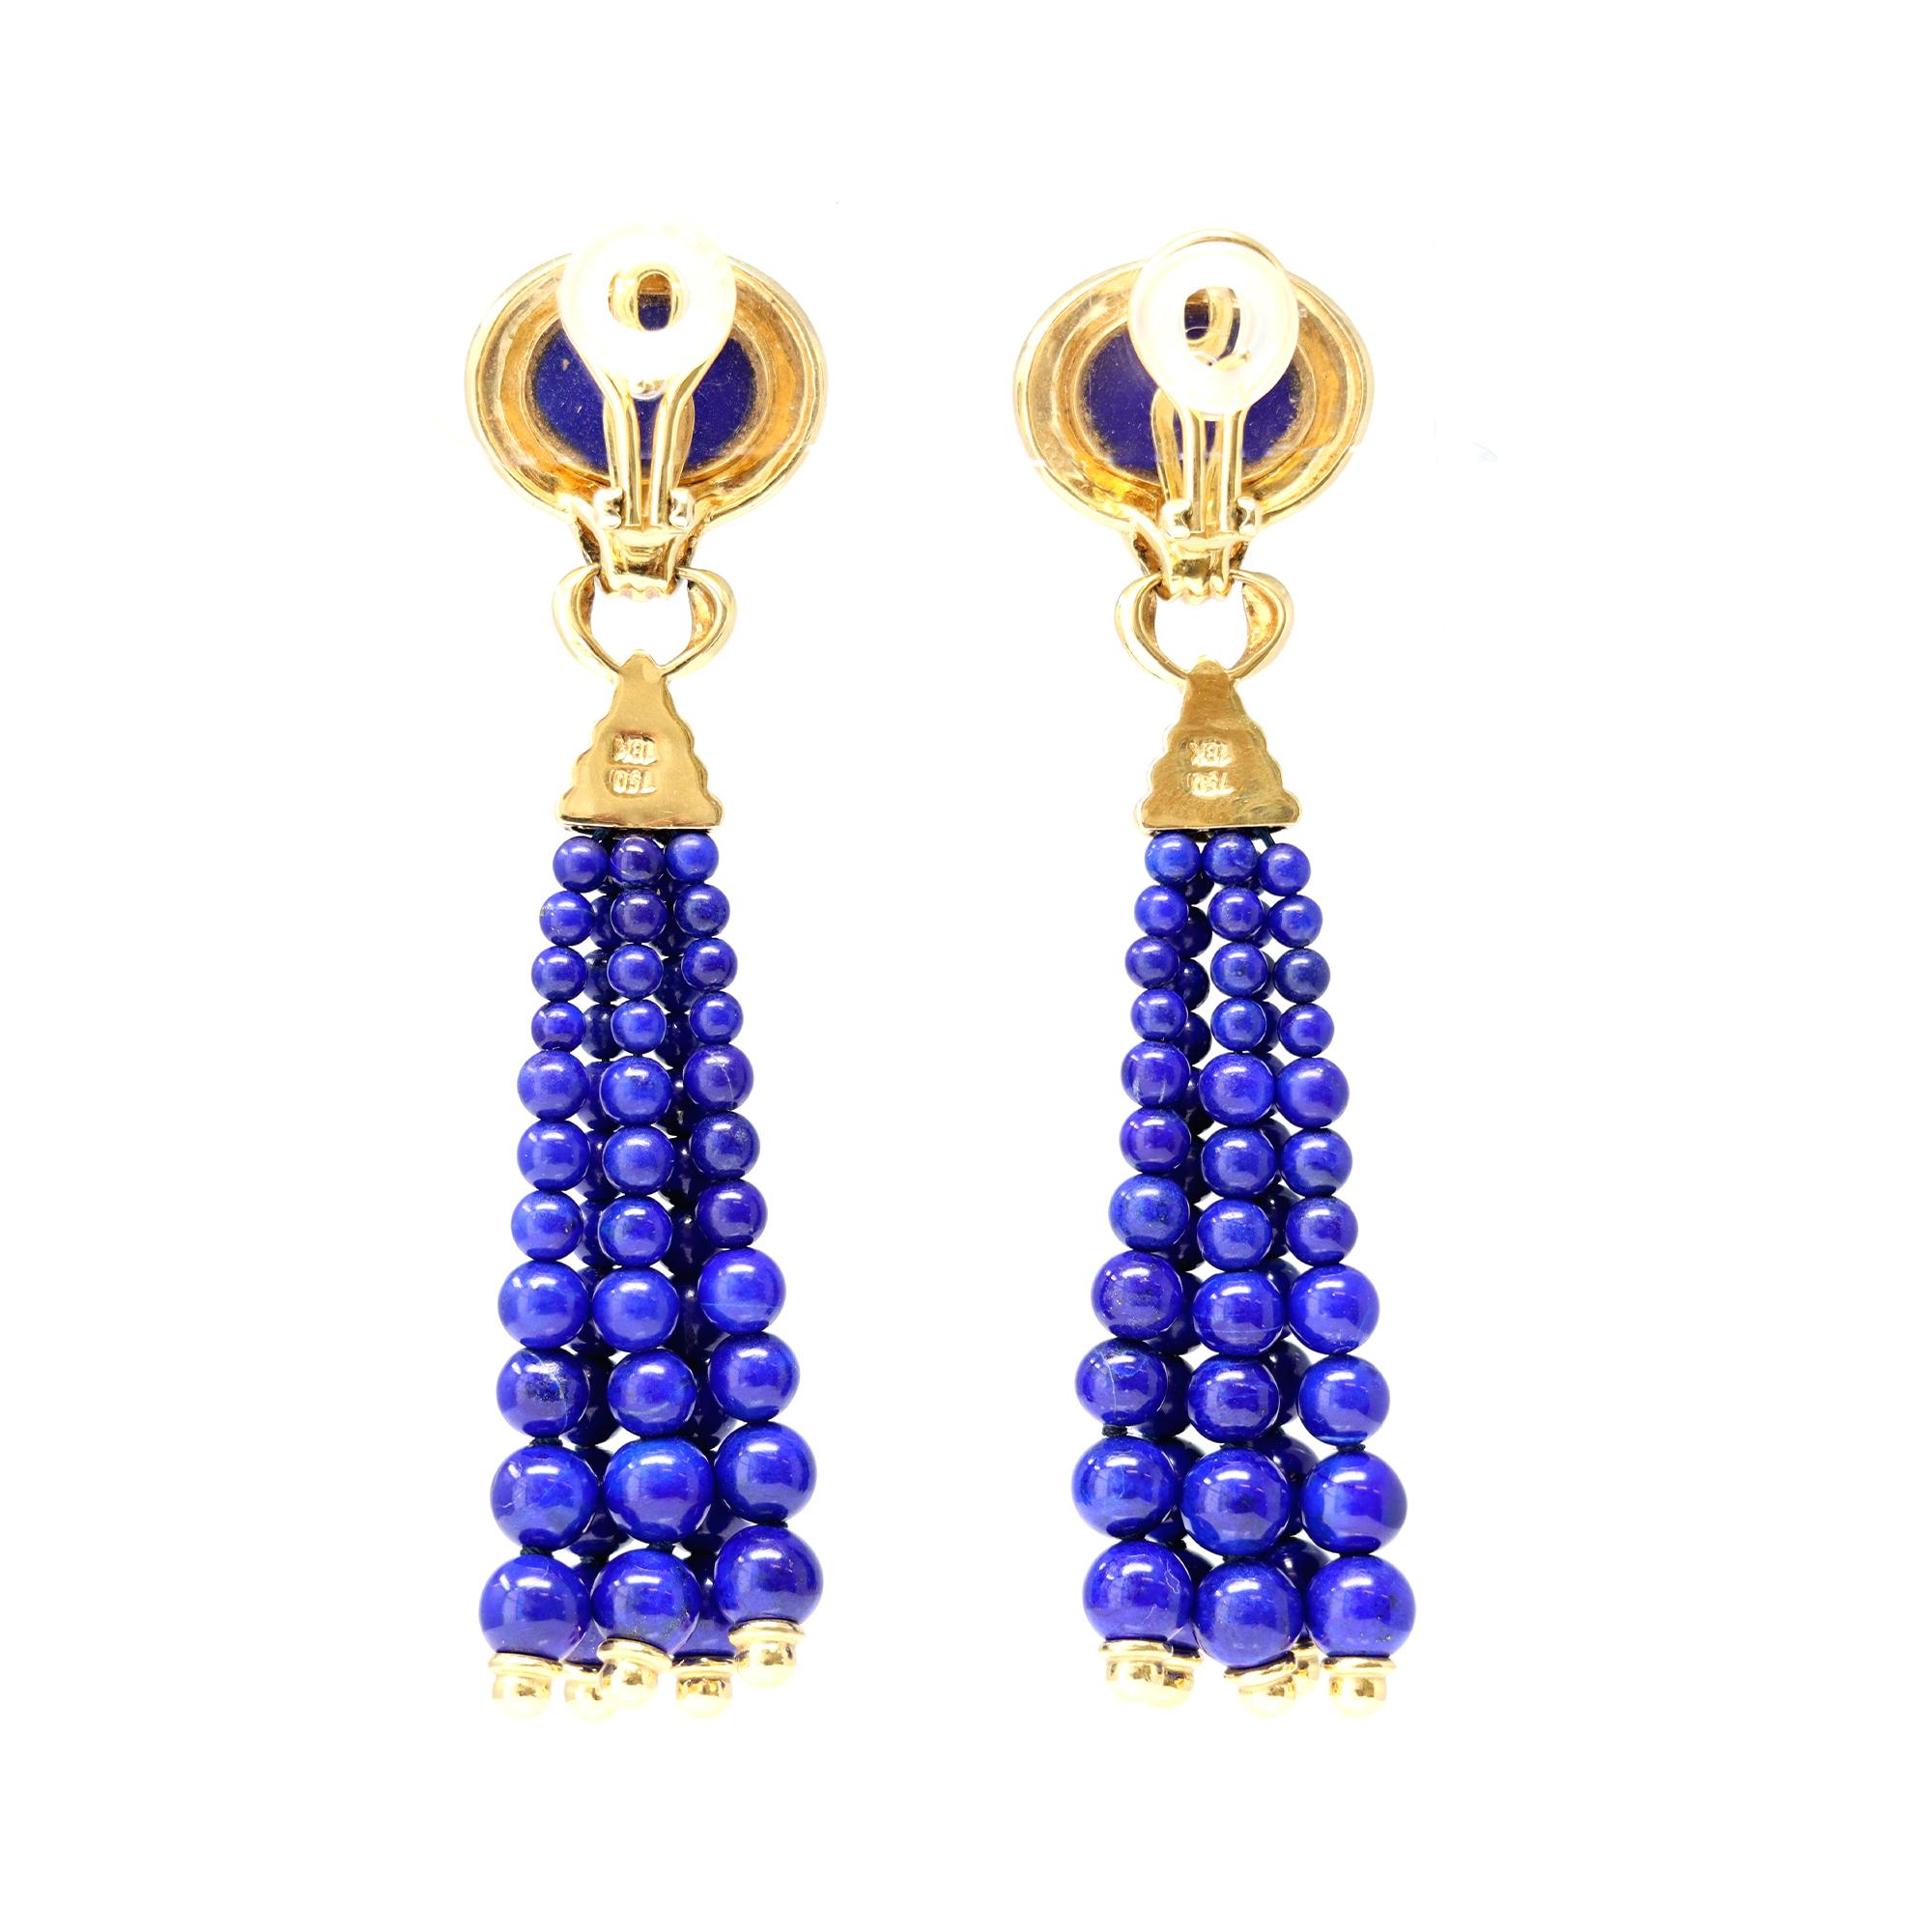 A striking pair of natural vivid blue lapis lazuli tassel earrings, with diamond accent. The earrings are set in 18 karat yellow gold and have a gross weight of 32.9 grams. The estimated weight of the diamonds is 0.25 carats, GH color and Vs-SI